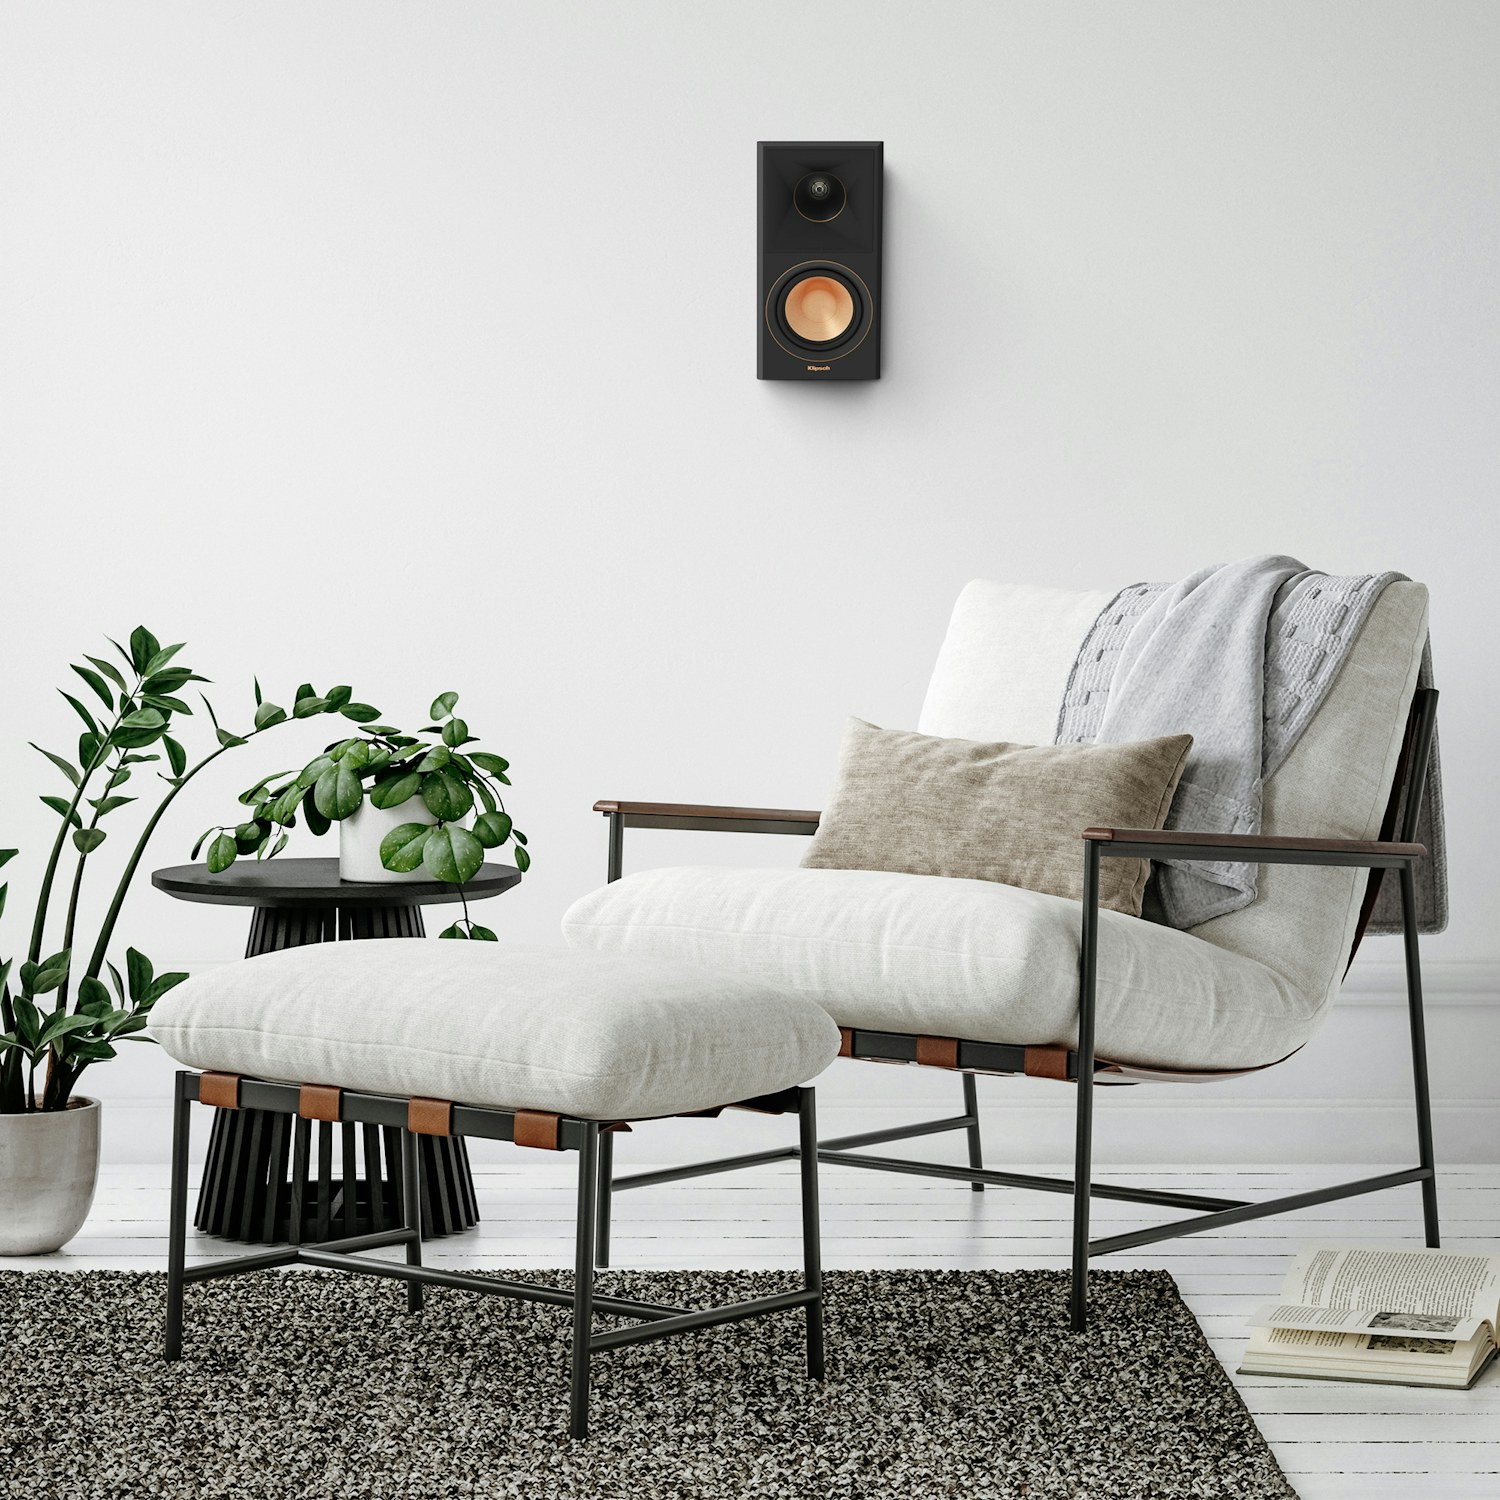 RP 500 SA II surround speaker hung on a greyish white wall near a chair mobile